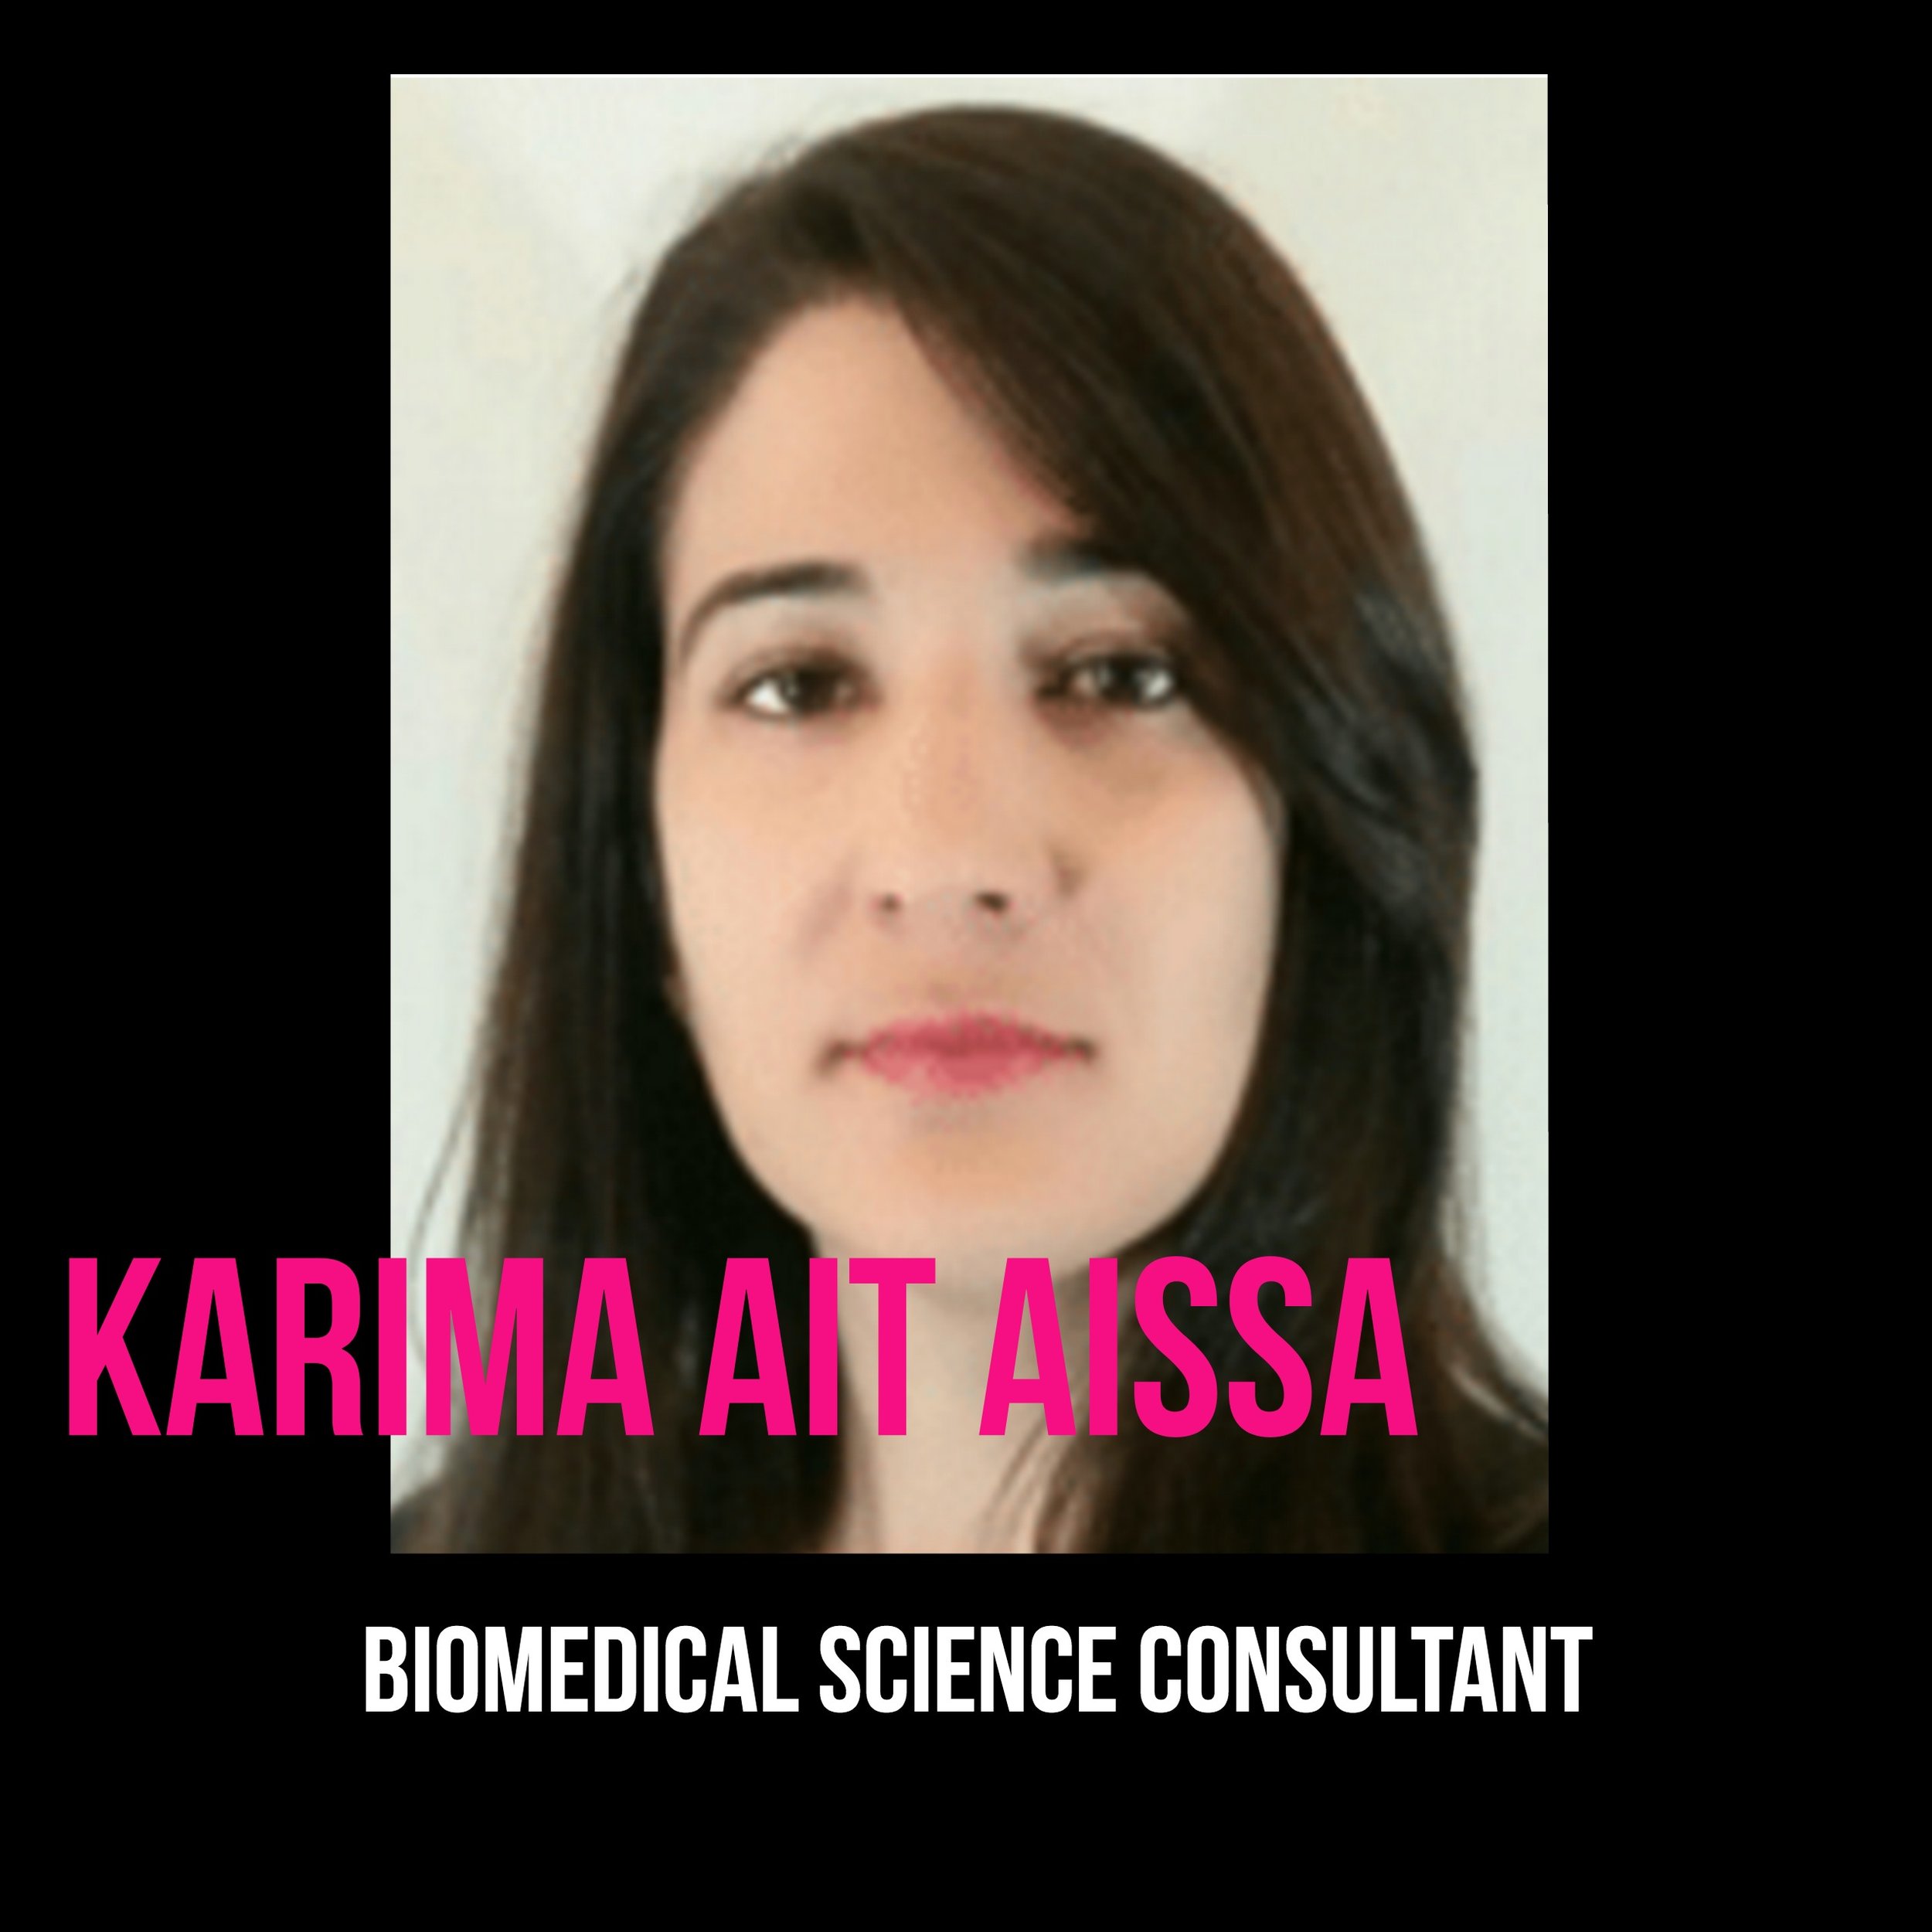 THE JILLS OF ALL TRADES™ Karima Ait Aissa Biomedical Science Consultant